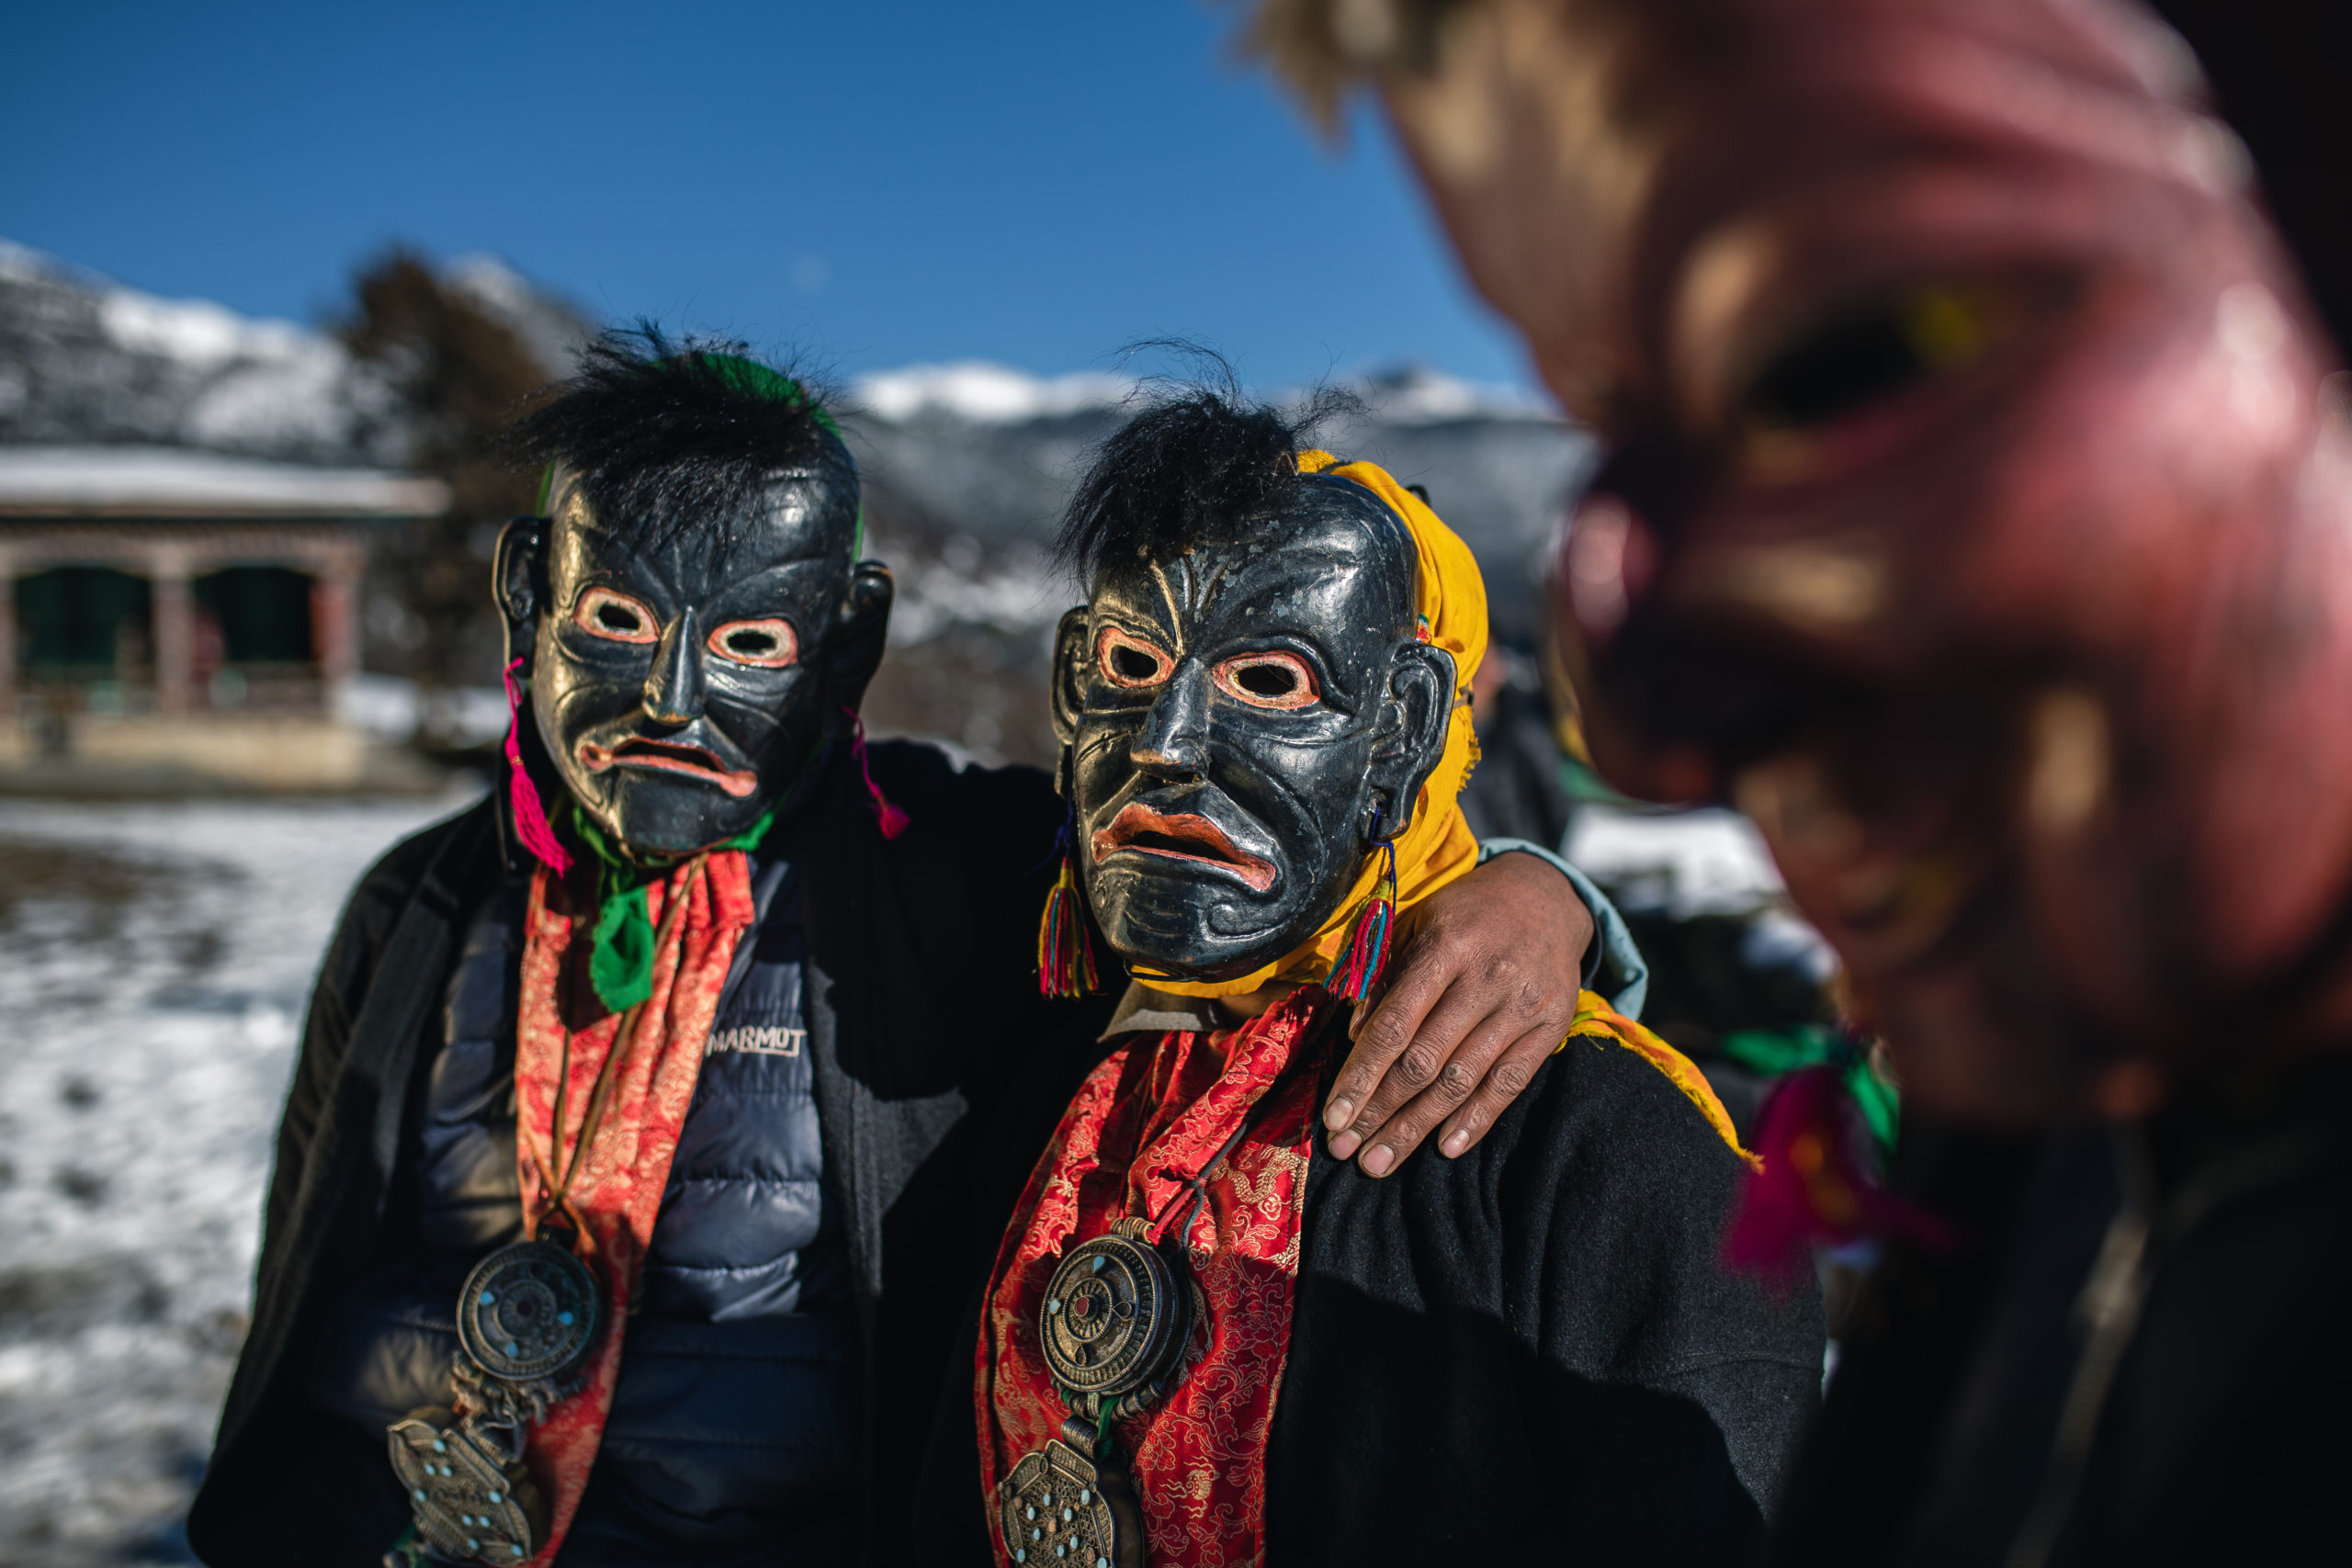 Photography of Bhutan's Traditional Masked Dancers